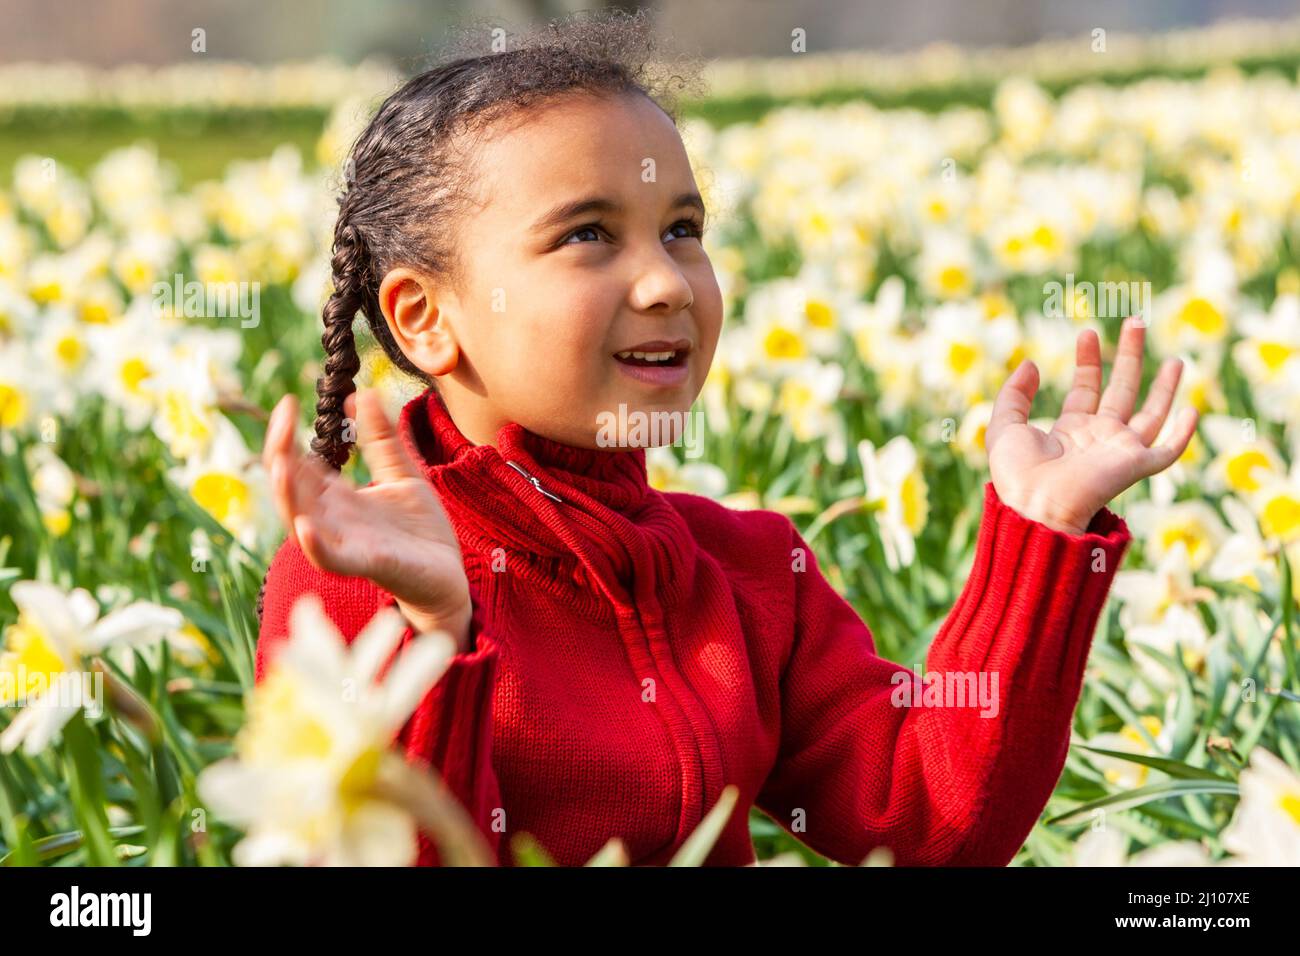 Beautiful young African American mixed race girl sitting playing in a field of daffodils looking up hands raised Stock Photo